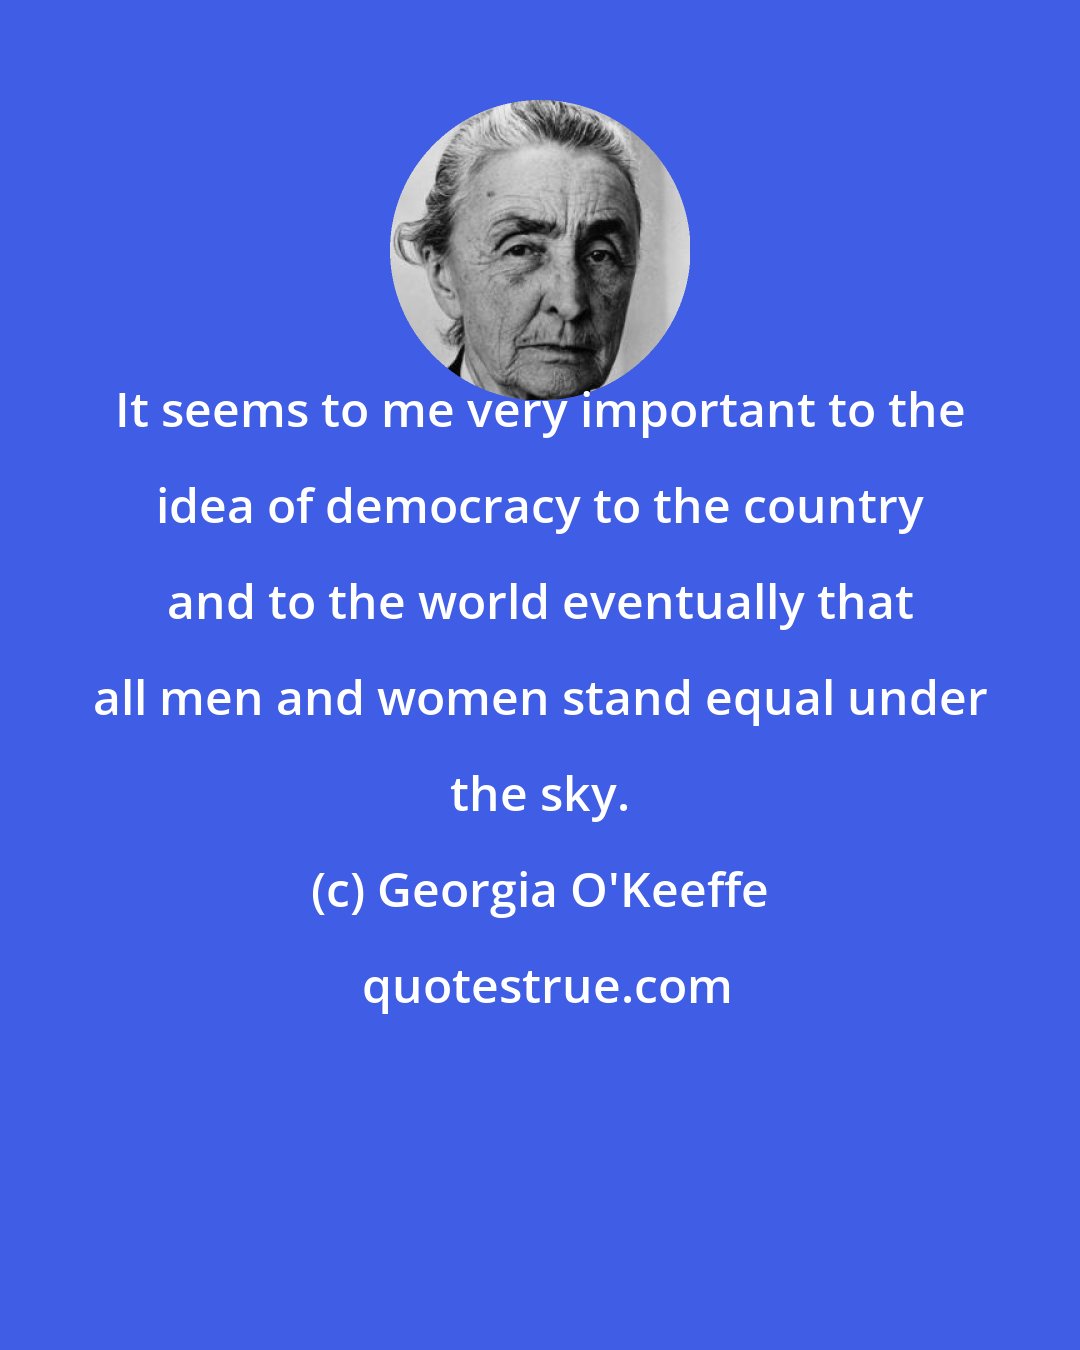 Georgia O'Keeffe: It seems to me very important to the idea of democracy to the country and to the world eventually that all men and women stand equal under the sky.